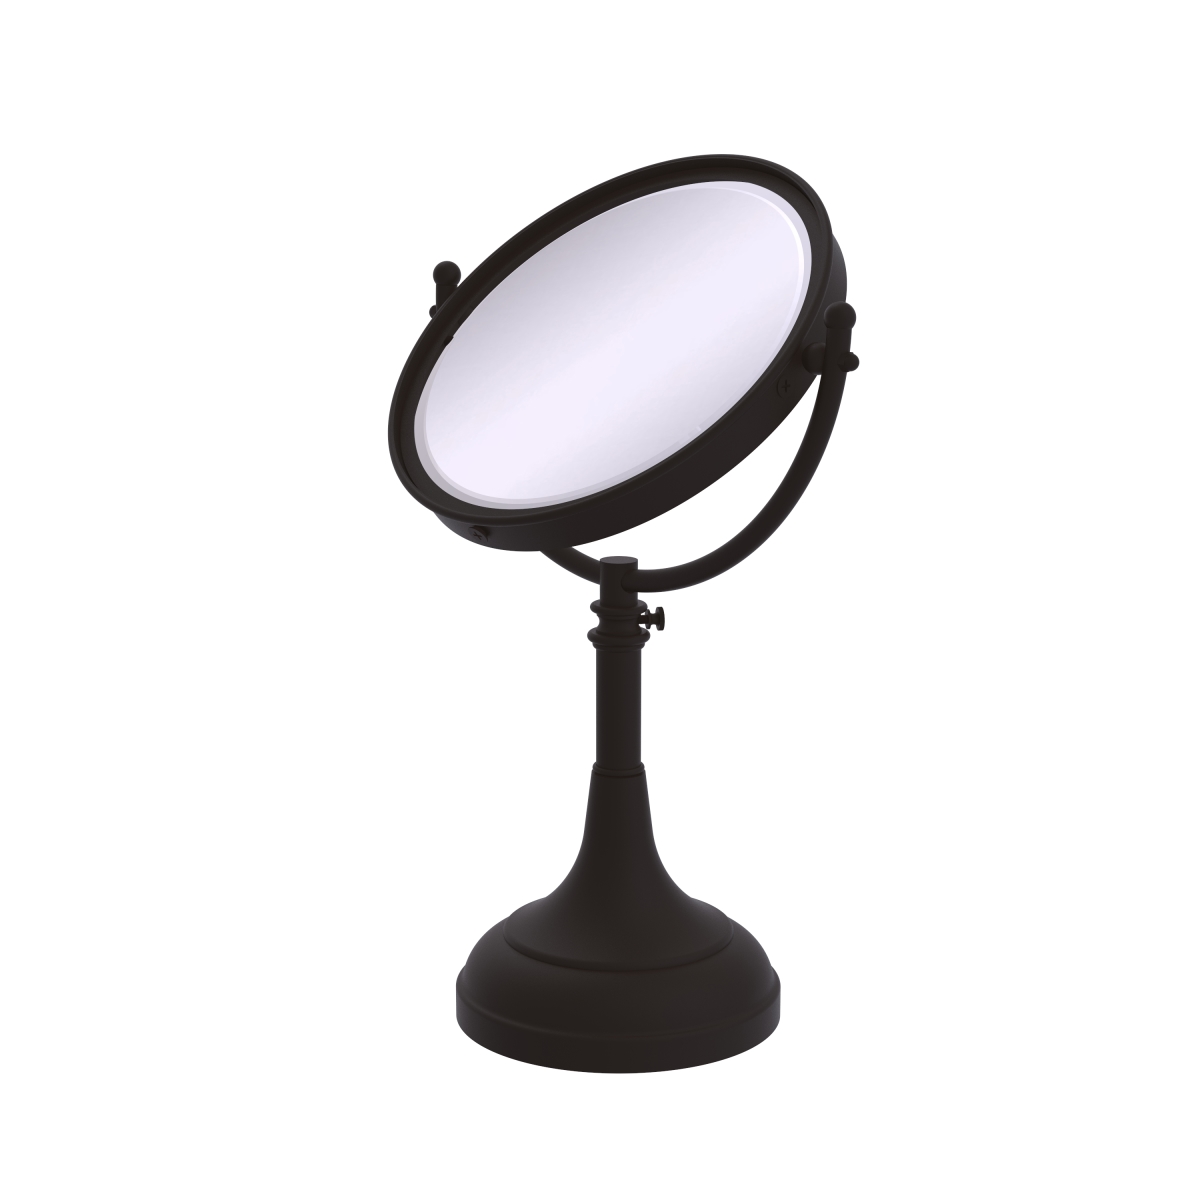 Dm-1-4x-orb Height Adjustable 8 In. Vanity Top Make-up Mirror 4x Magnification, Oil Rubbed Bronze